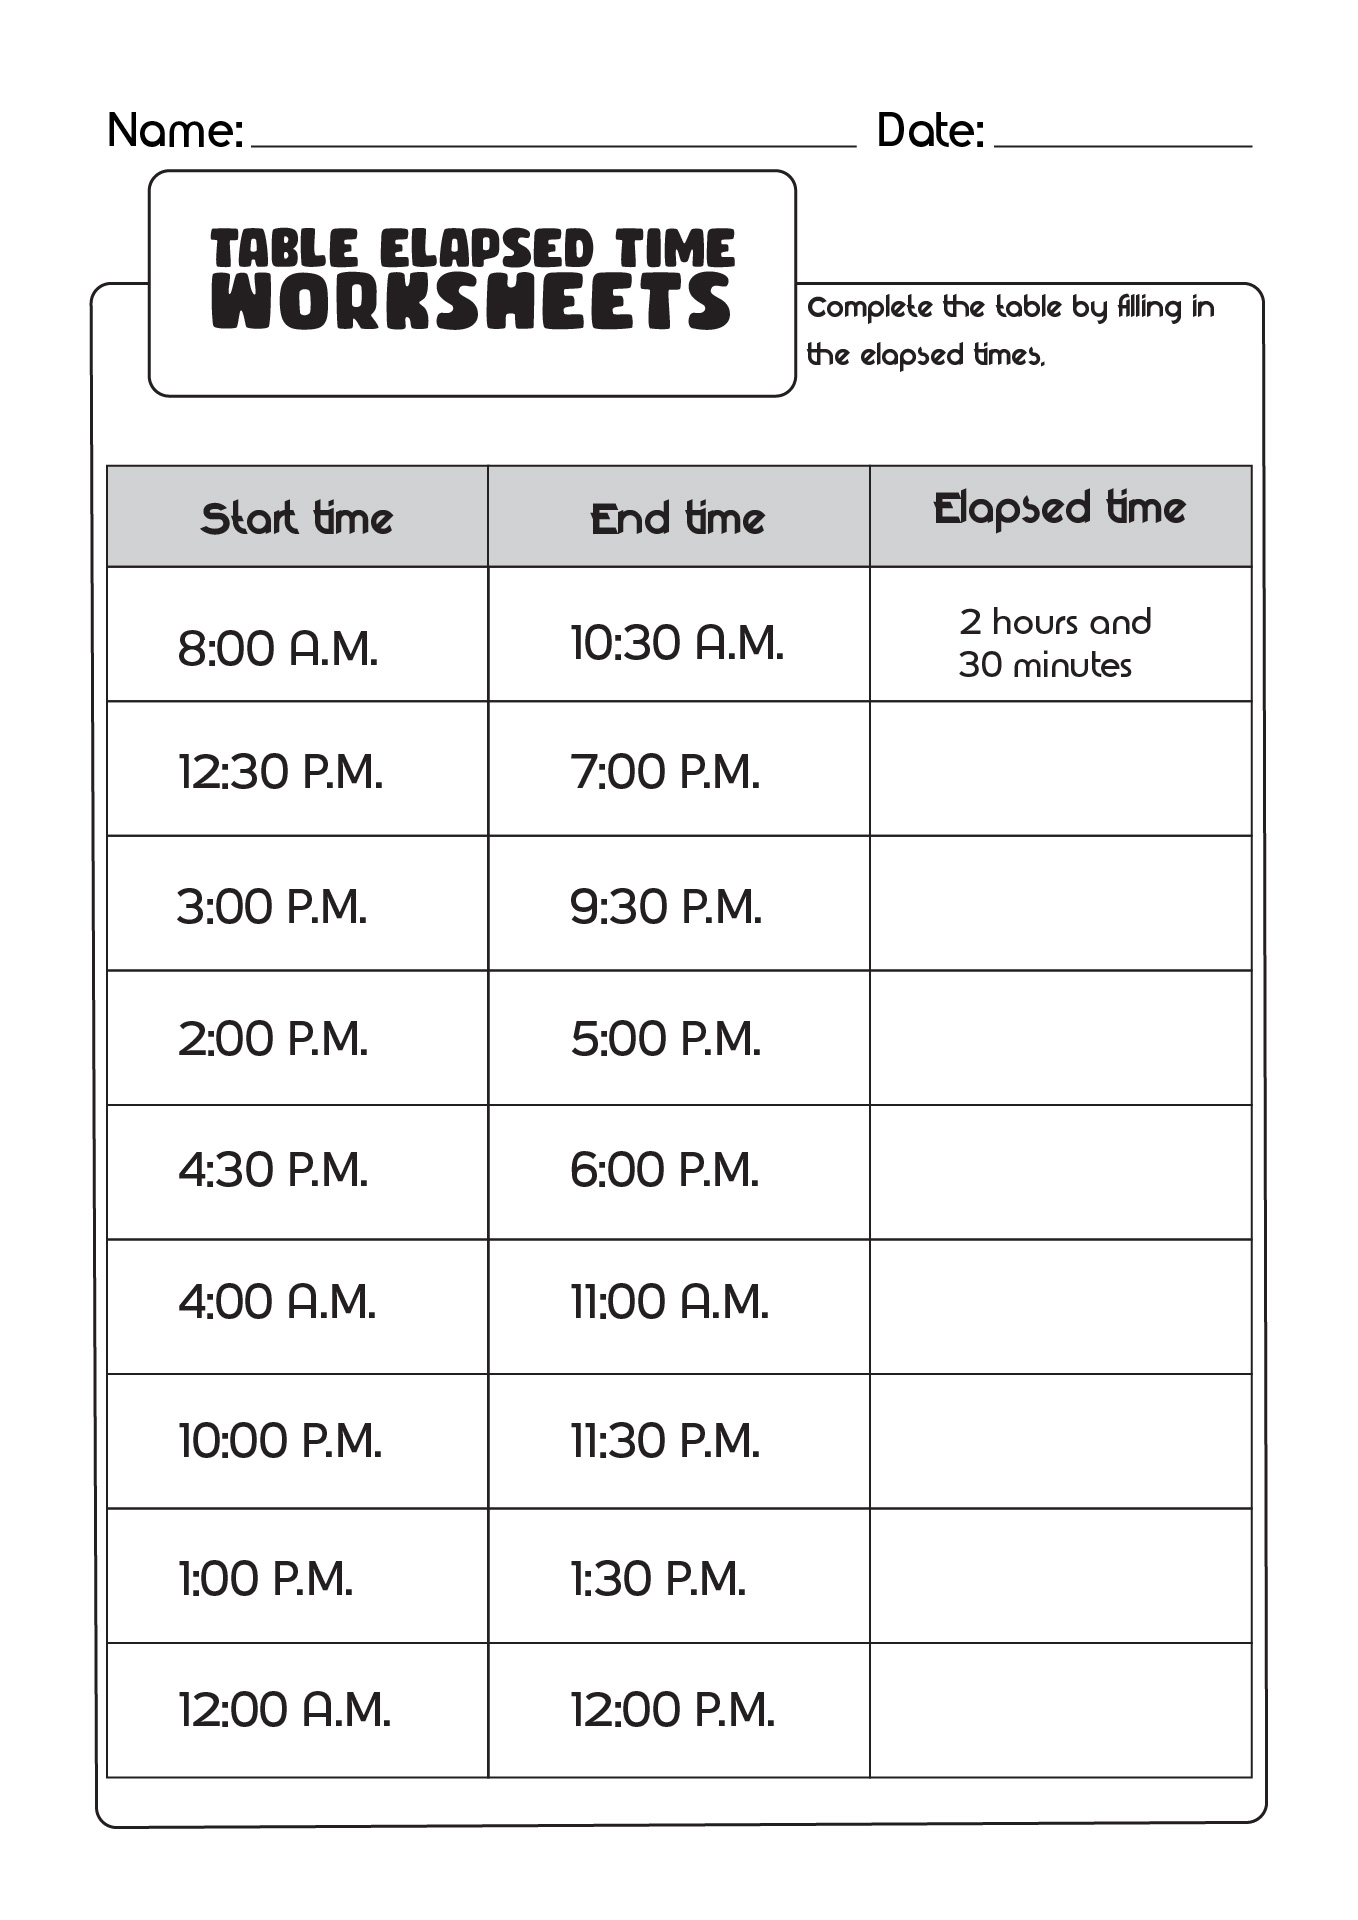 Table Elapsed Time Worksheets Image